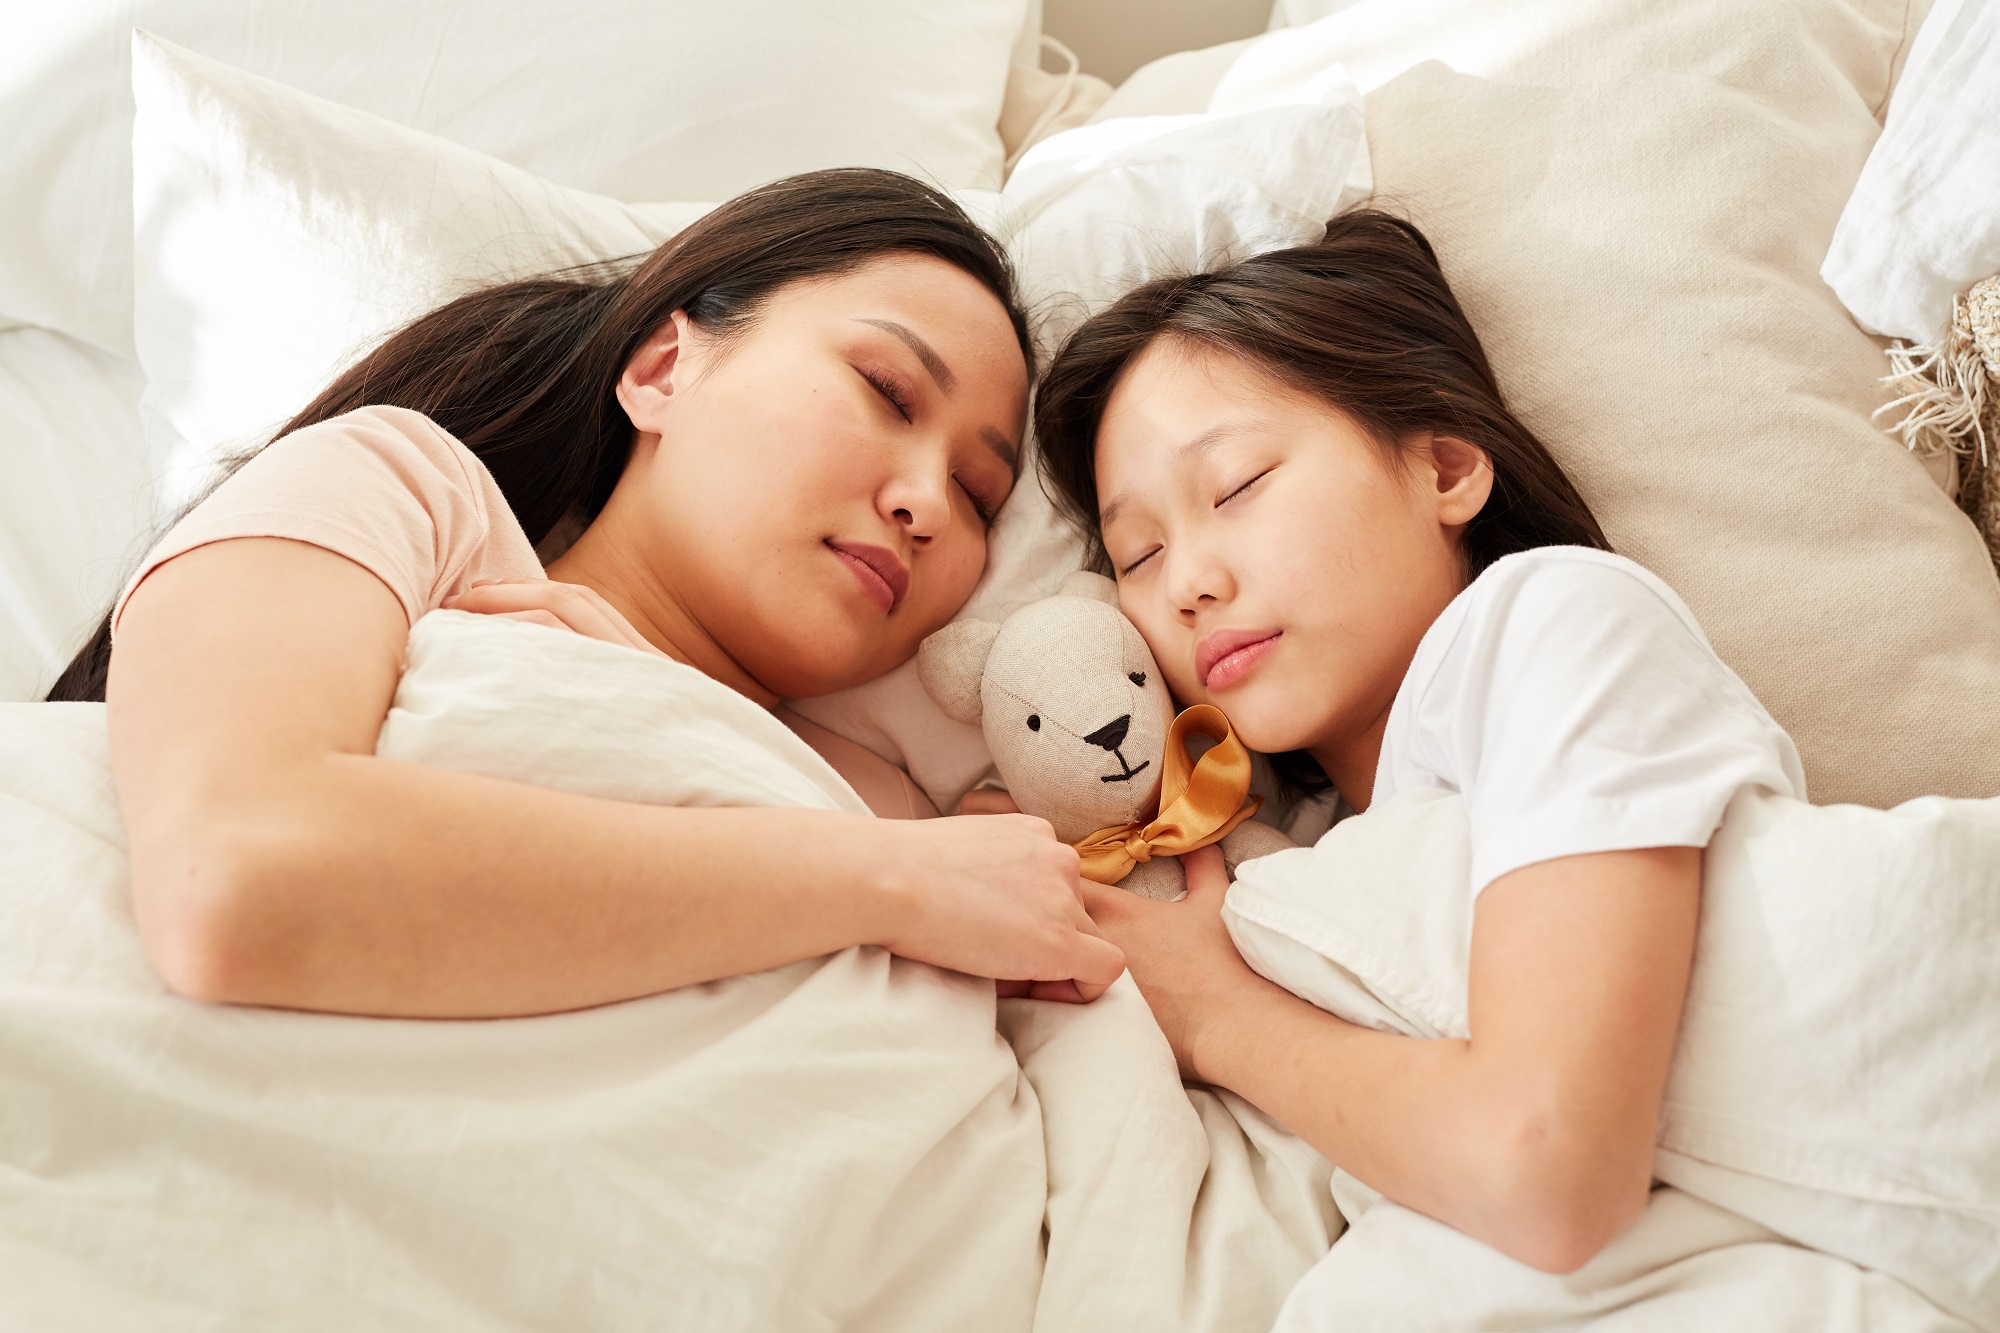 Asian mother sleeping together with her daughter in the bed in the bedroom